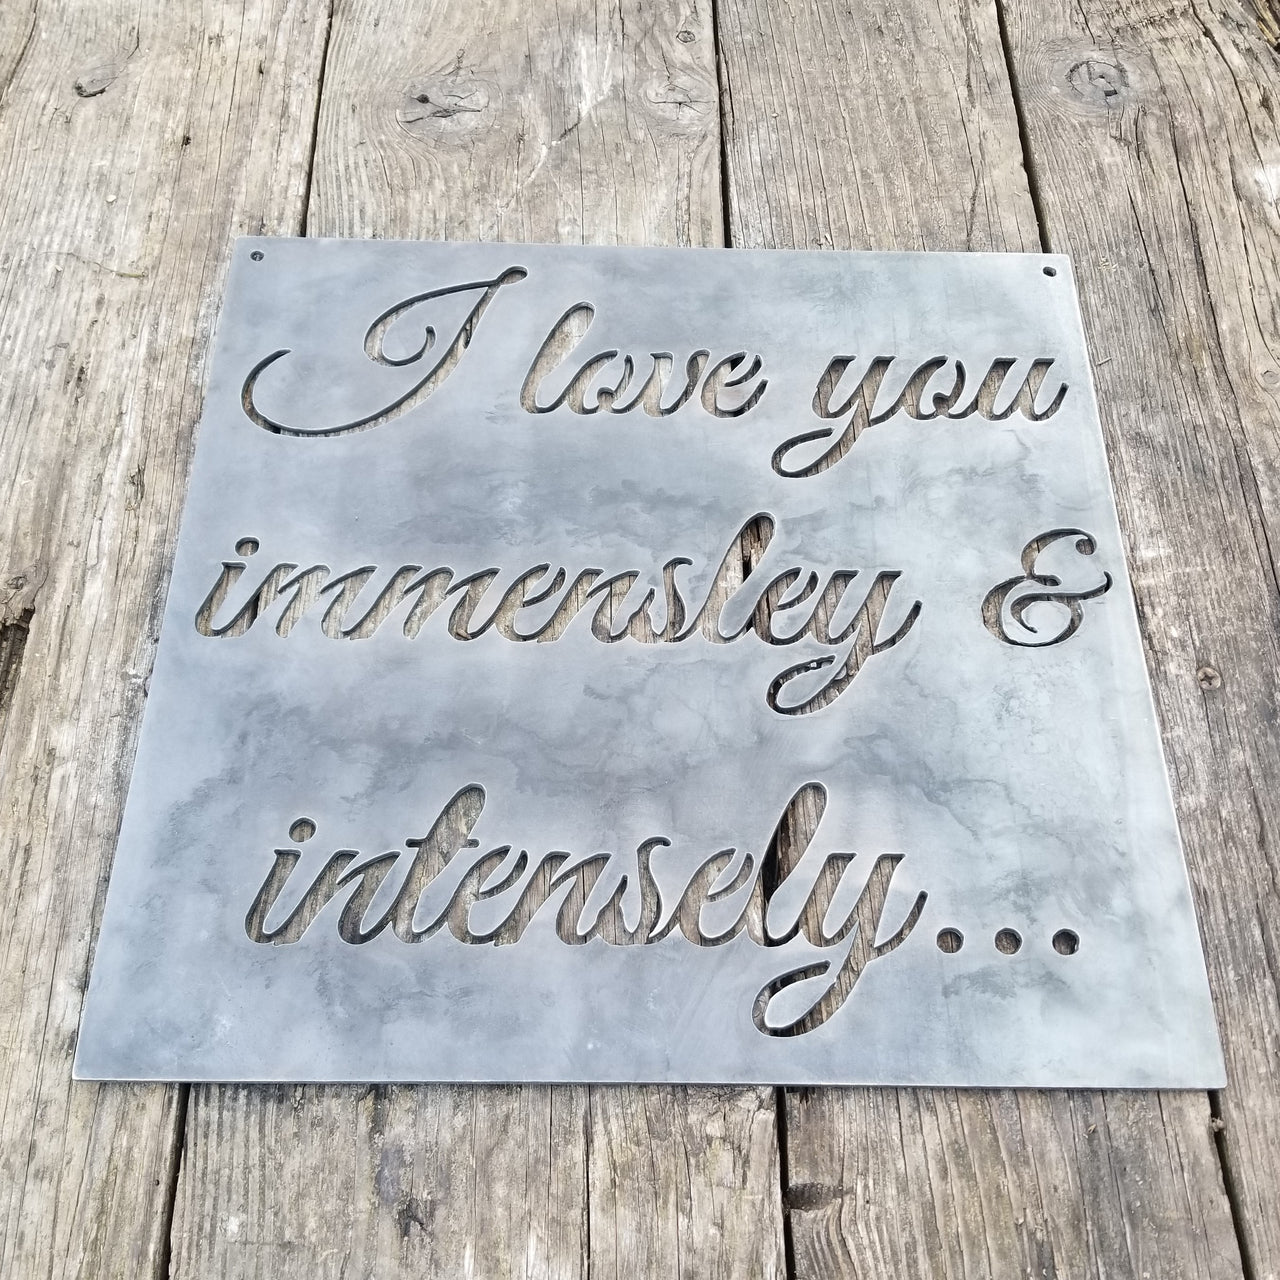 Square plaque with cursive writing in it. The sign reads, " I Love you immensely and intensely"